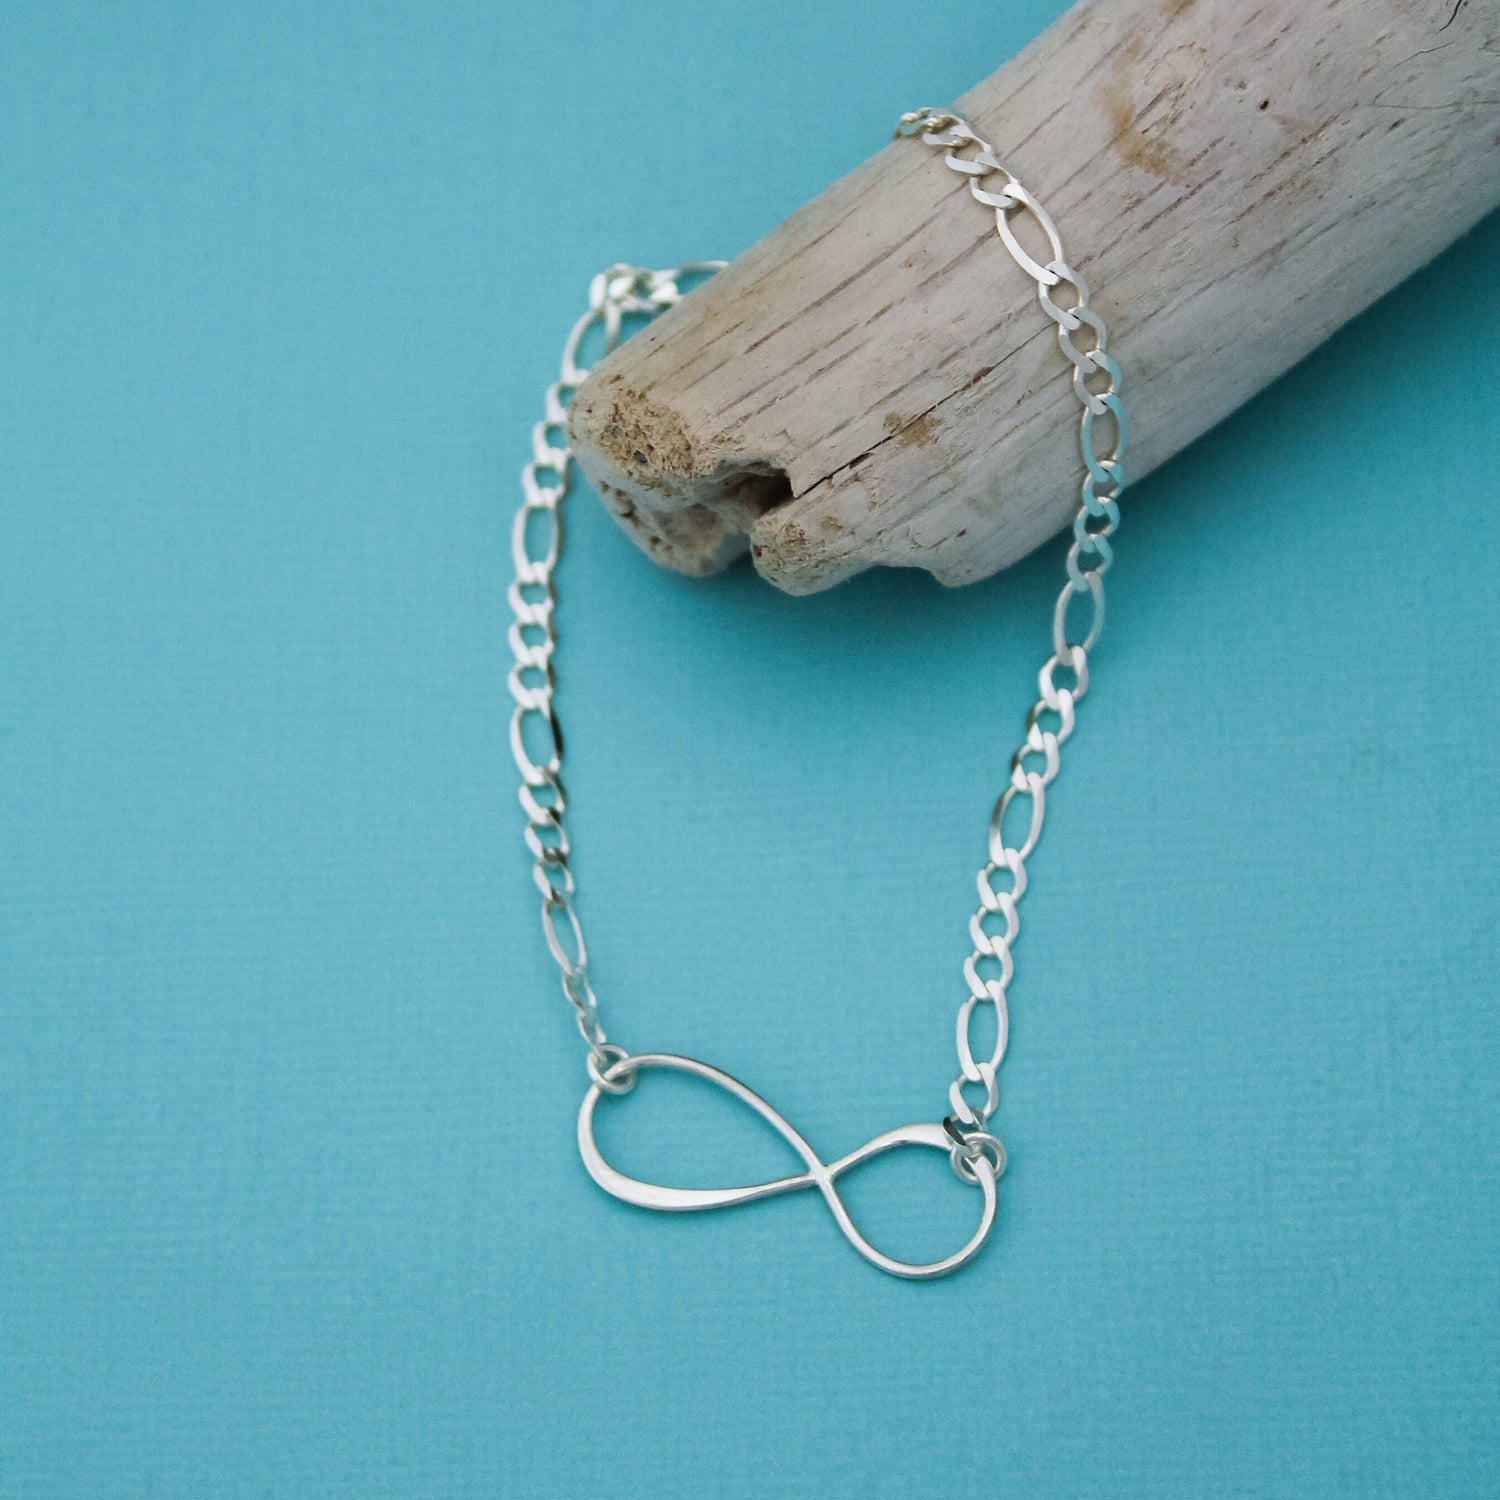 Infinity Anklet, Anniversary Gift, Love you to Infinity, Love Jewelry, Sterling Silver Anklet, Gifts for Her, Summer Cruise Jewelry